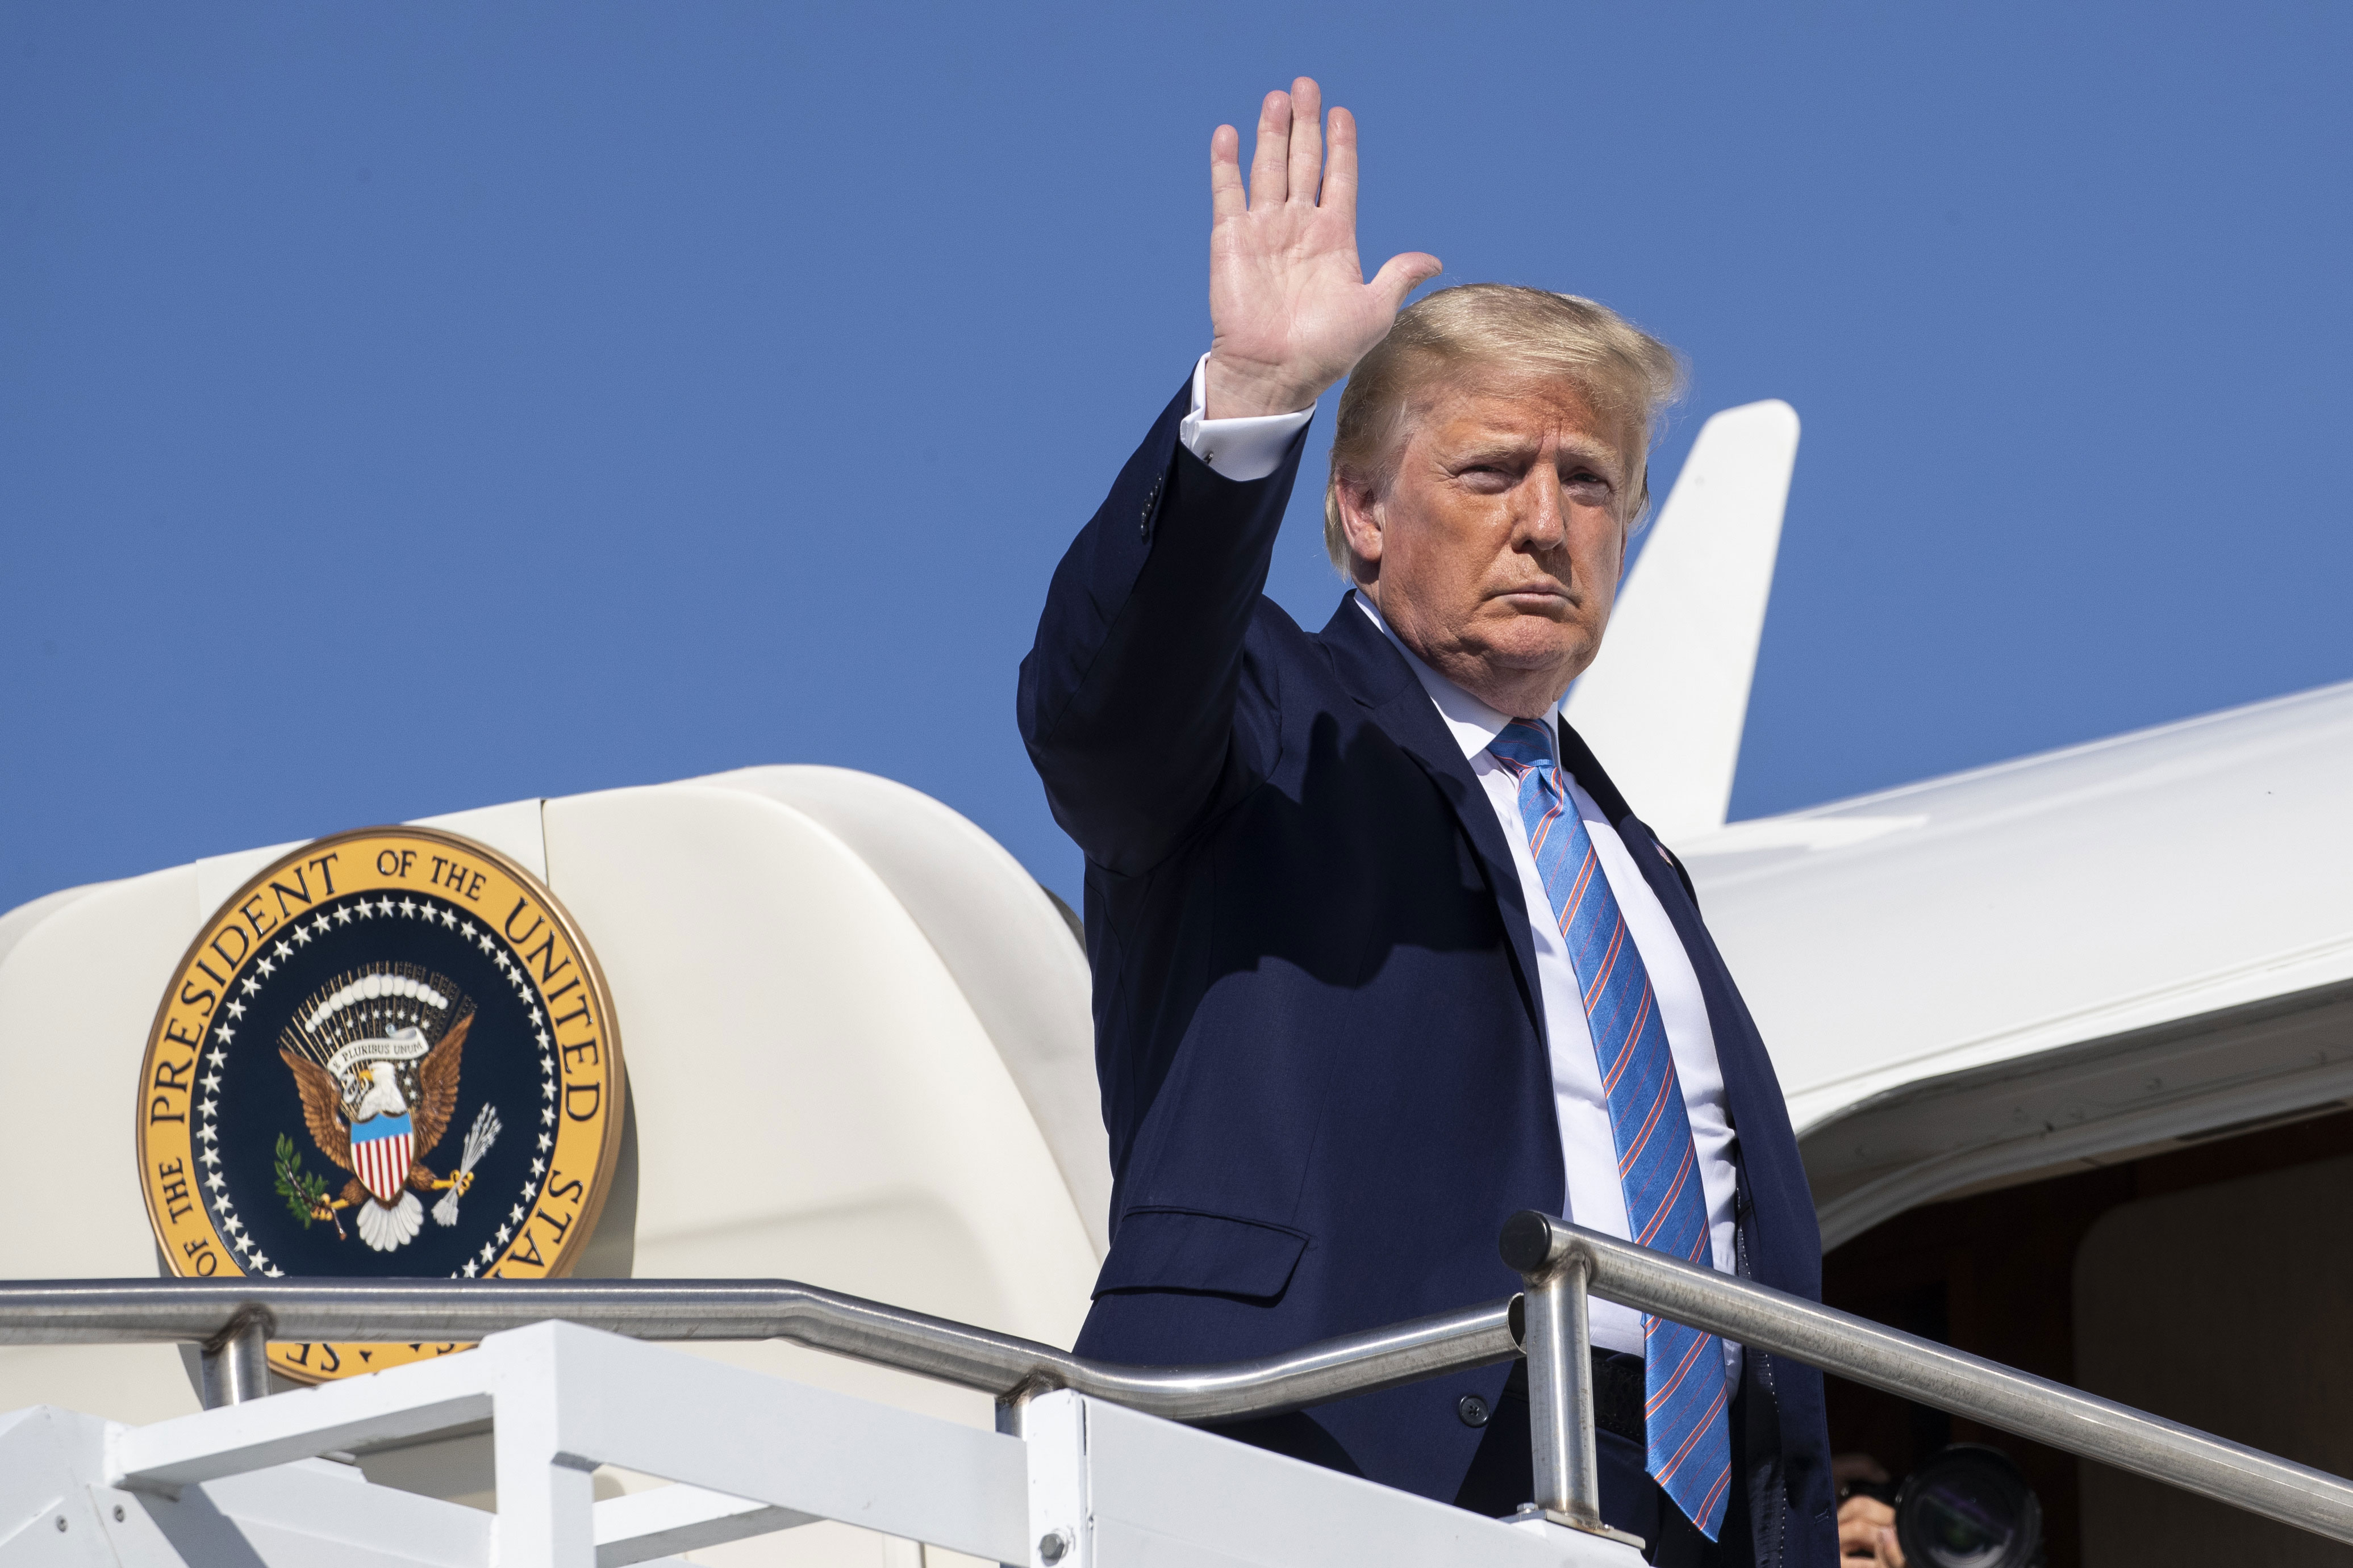 President Donald Trump waves as he boards Air Force One at Morristown Municipal Airport, in New Jersey.